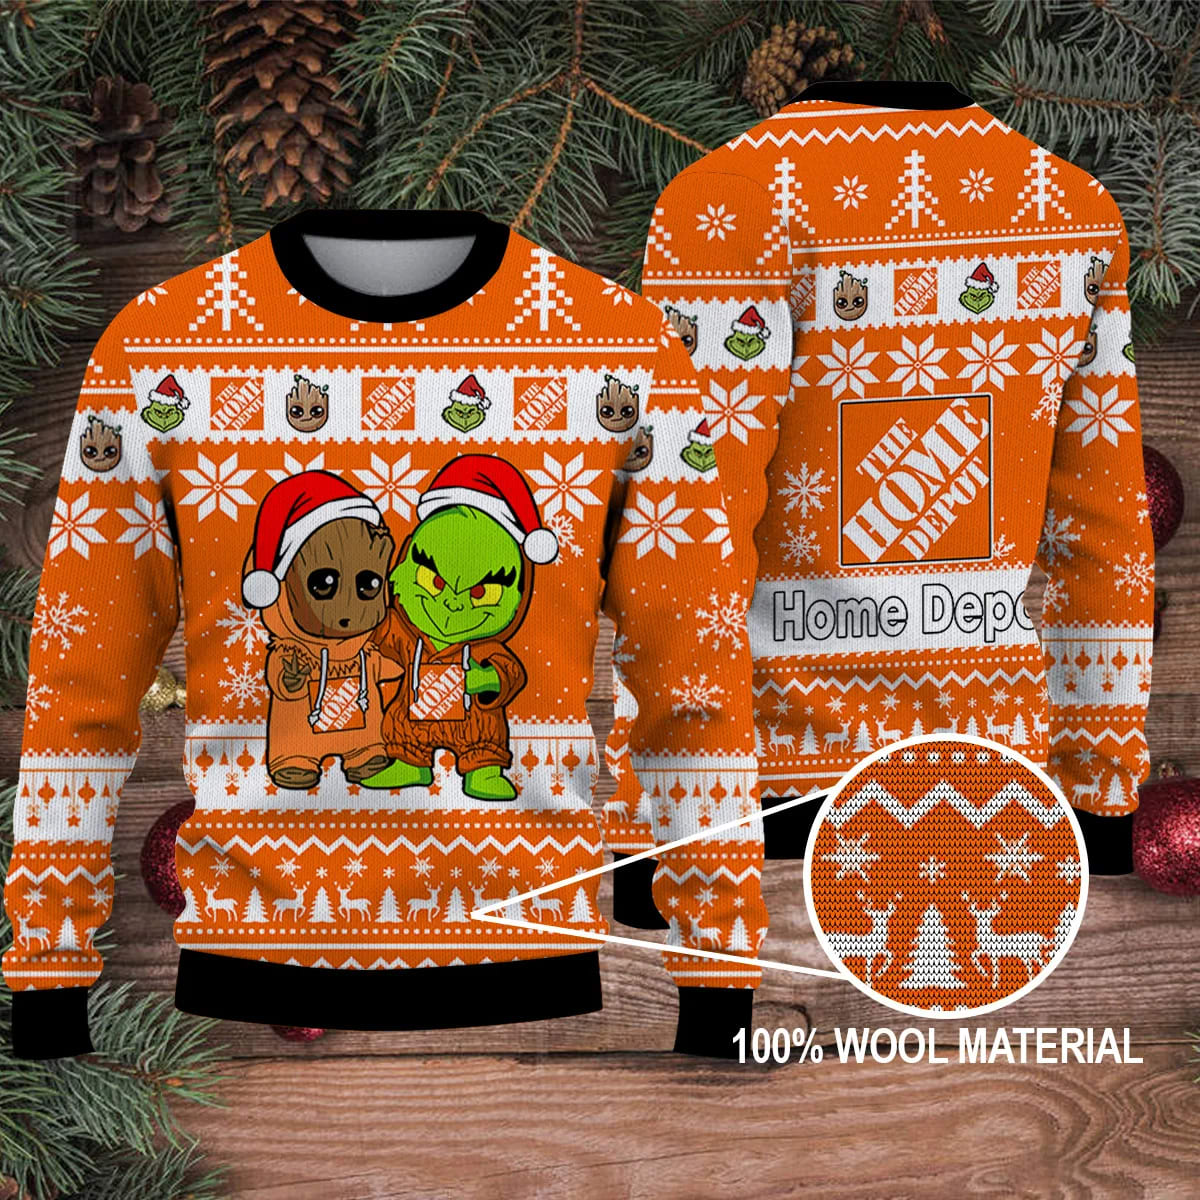 Grinch Movie 2023 The Grinch Merry Christmas Ugly Sweater Home Depot Cckwp7.jpg